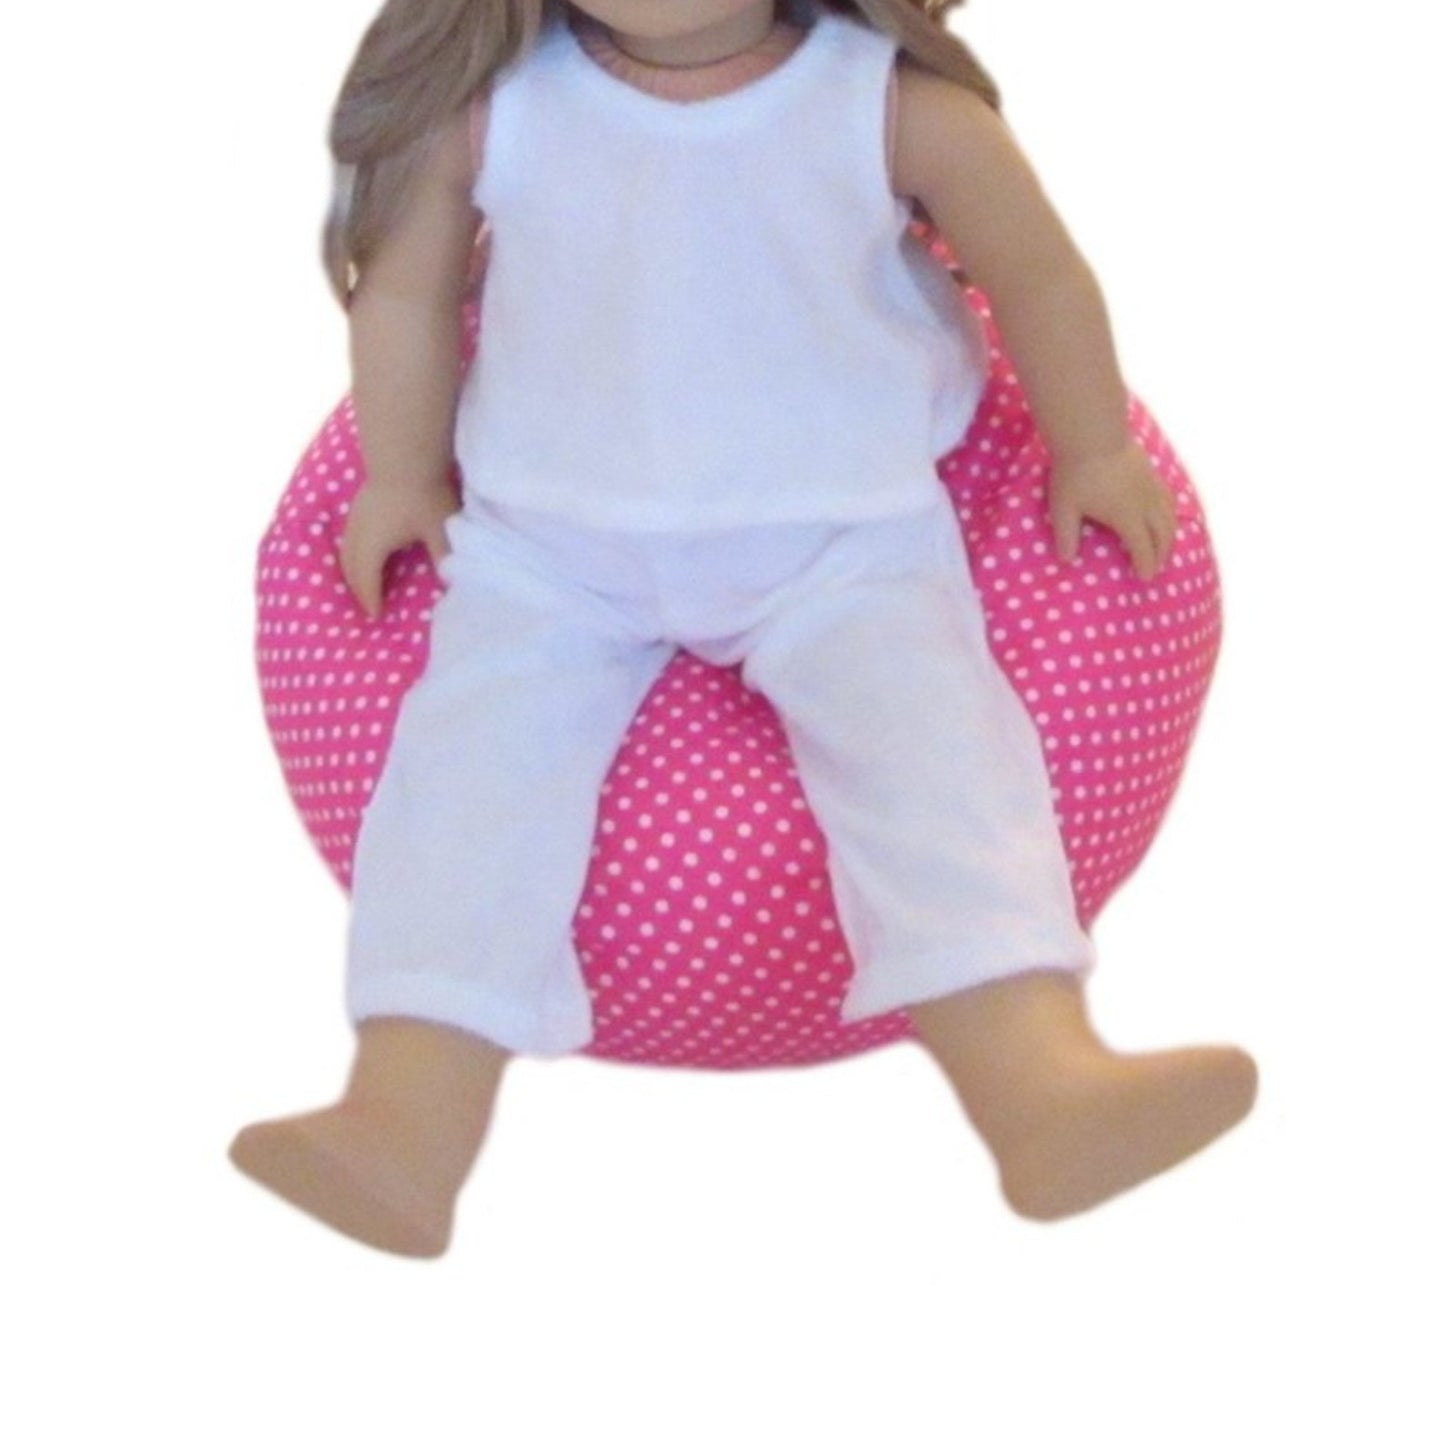 Pink Dots Doll Bean Bag Chair for 18-inch dolls with doll